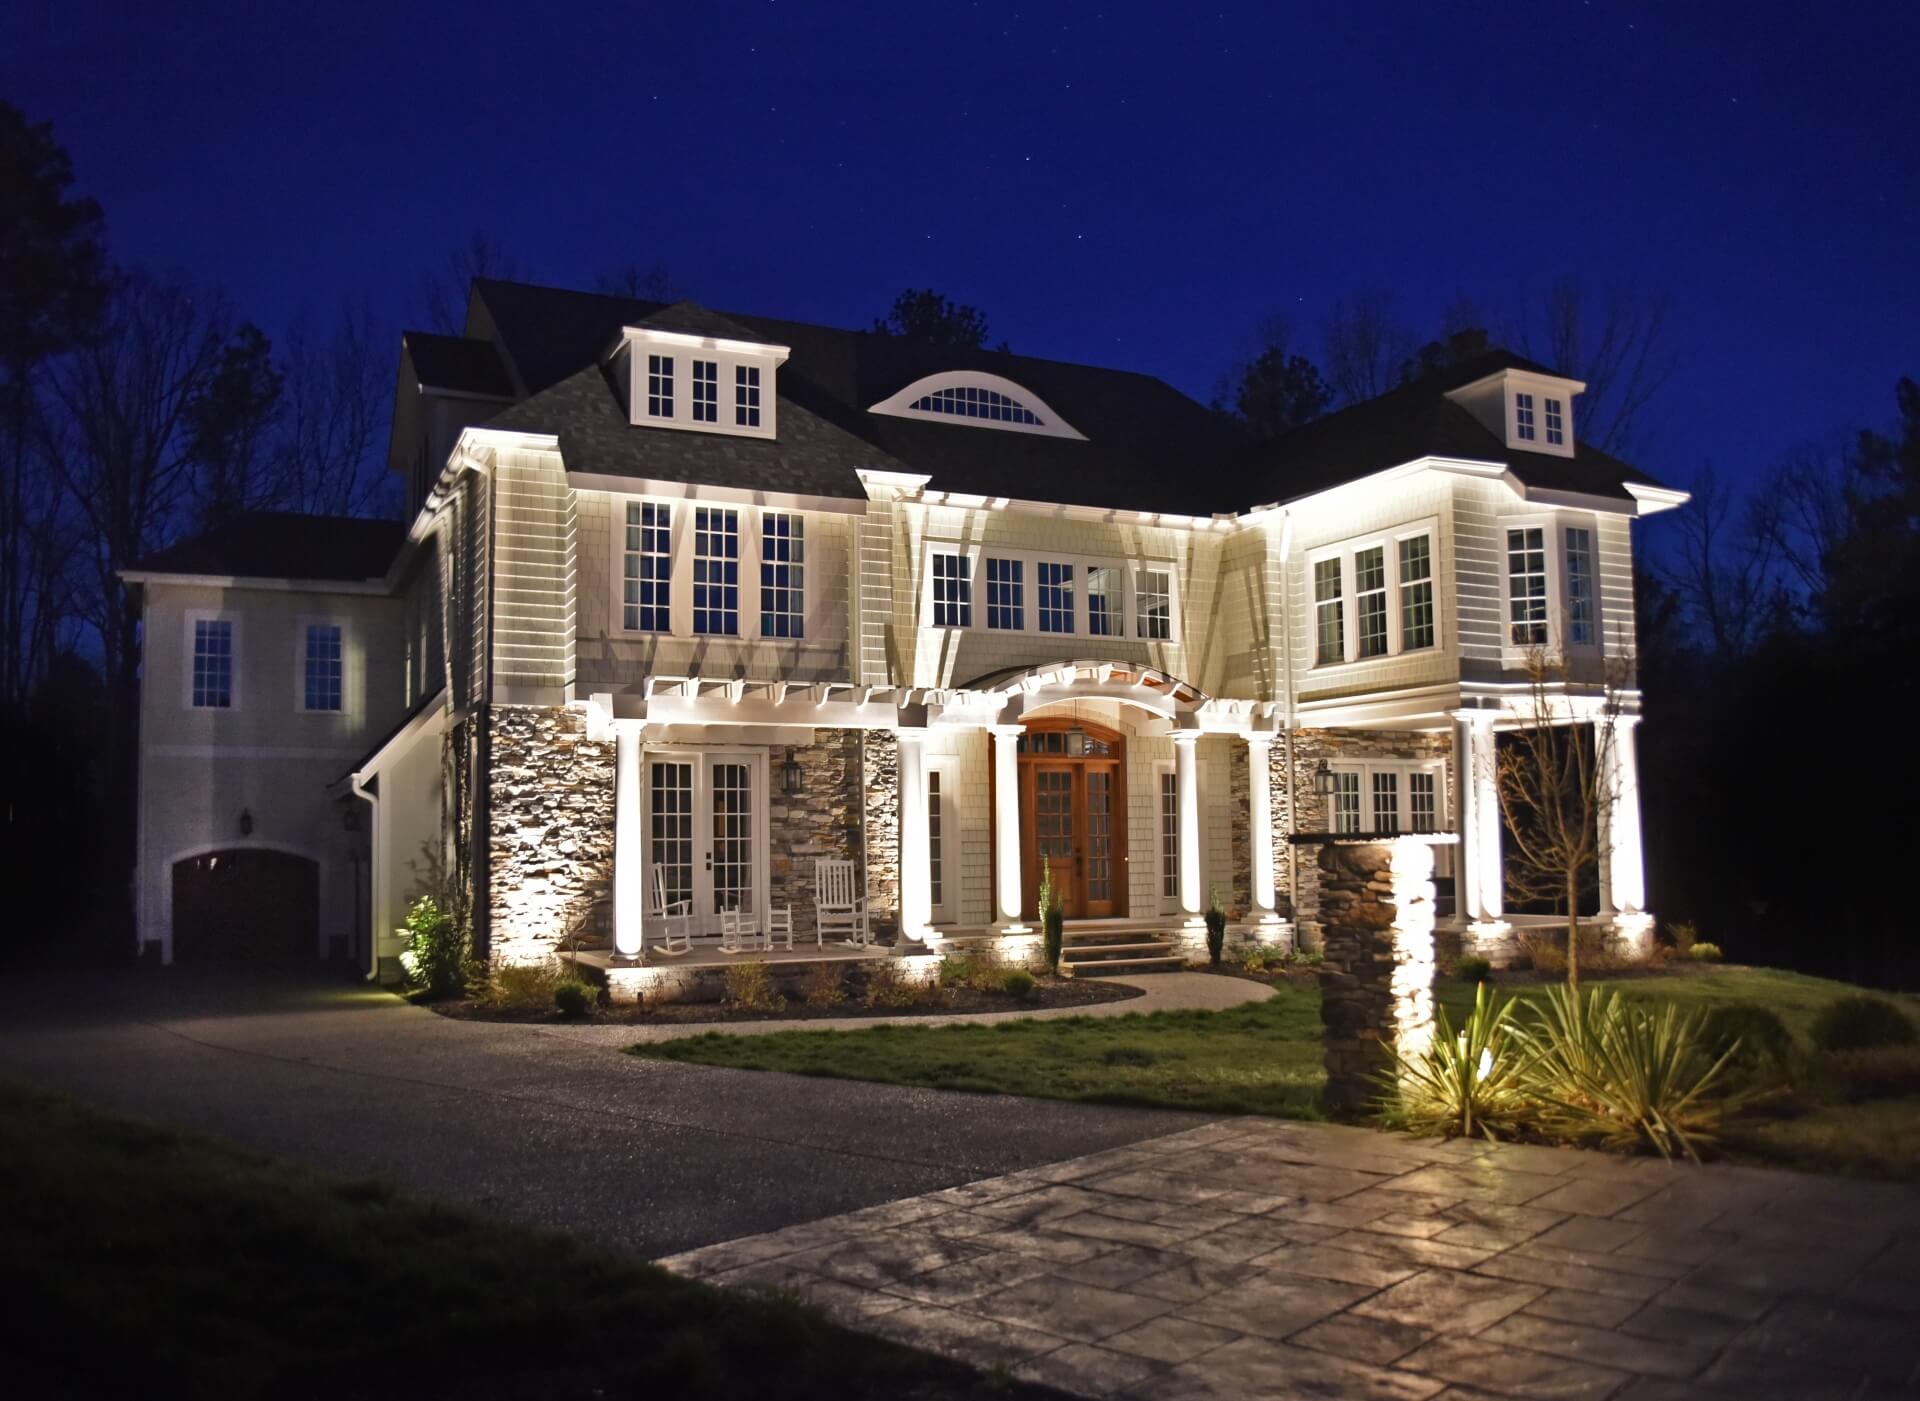 Residential Landscape Lighting | Outdoor Lighting Company